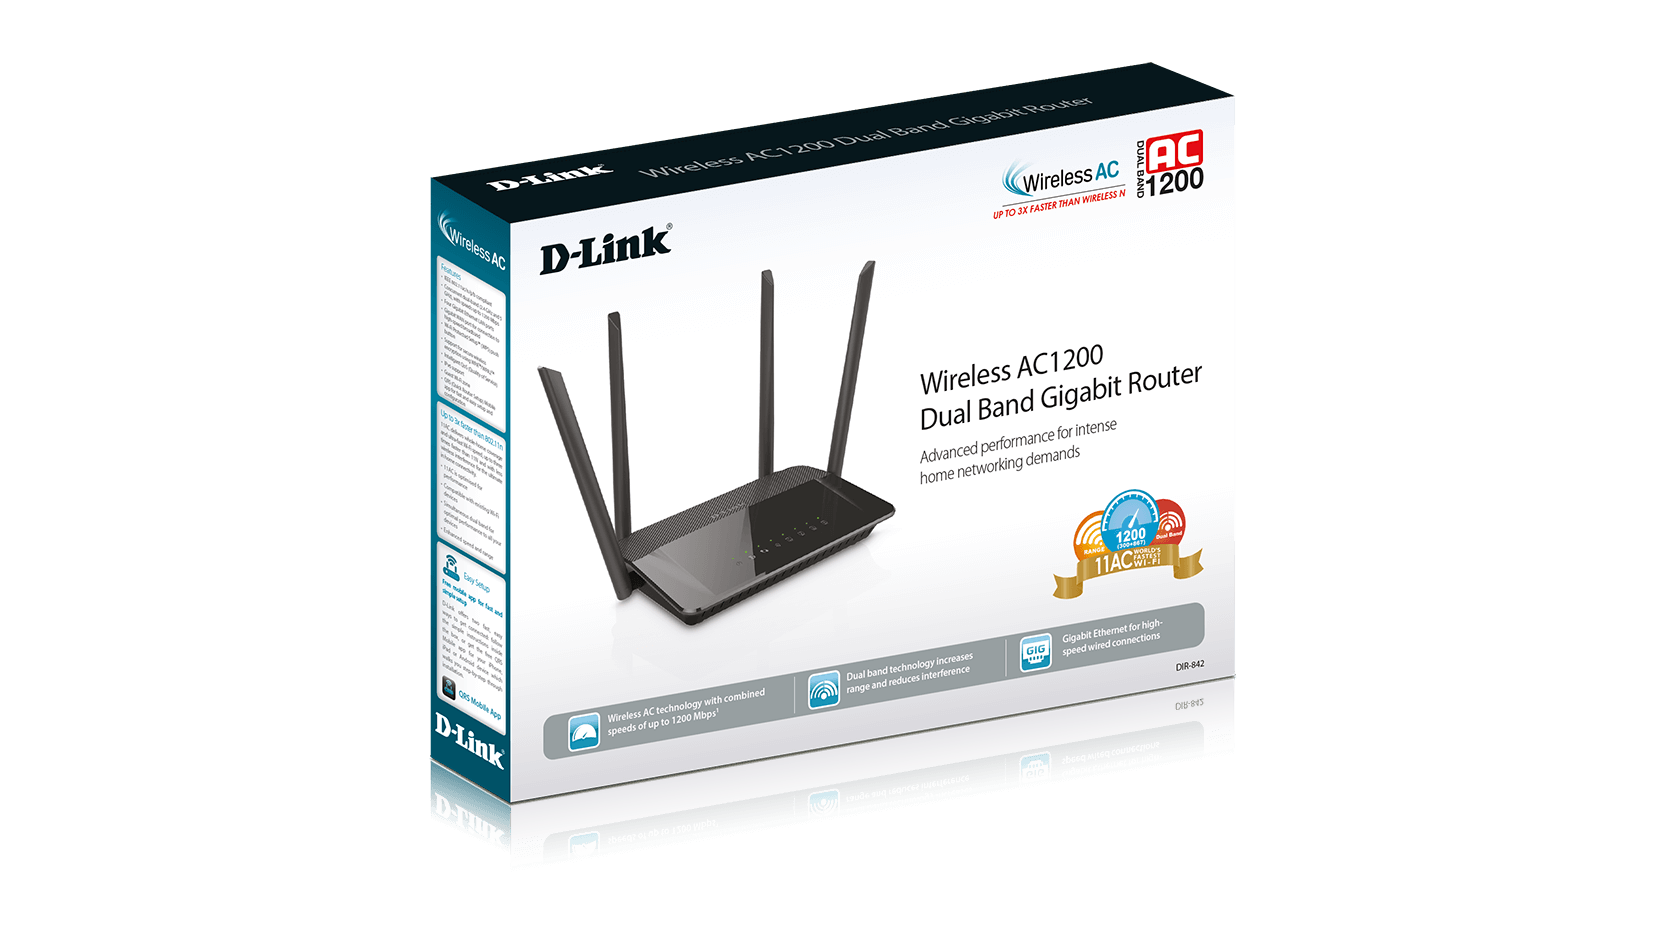 Connection Specific Dishonesty DIR-842 Wireless AC1200 MU-MIMO Dual-Band Router | D-Link UK